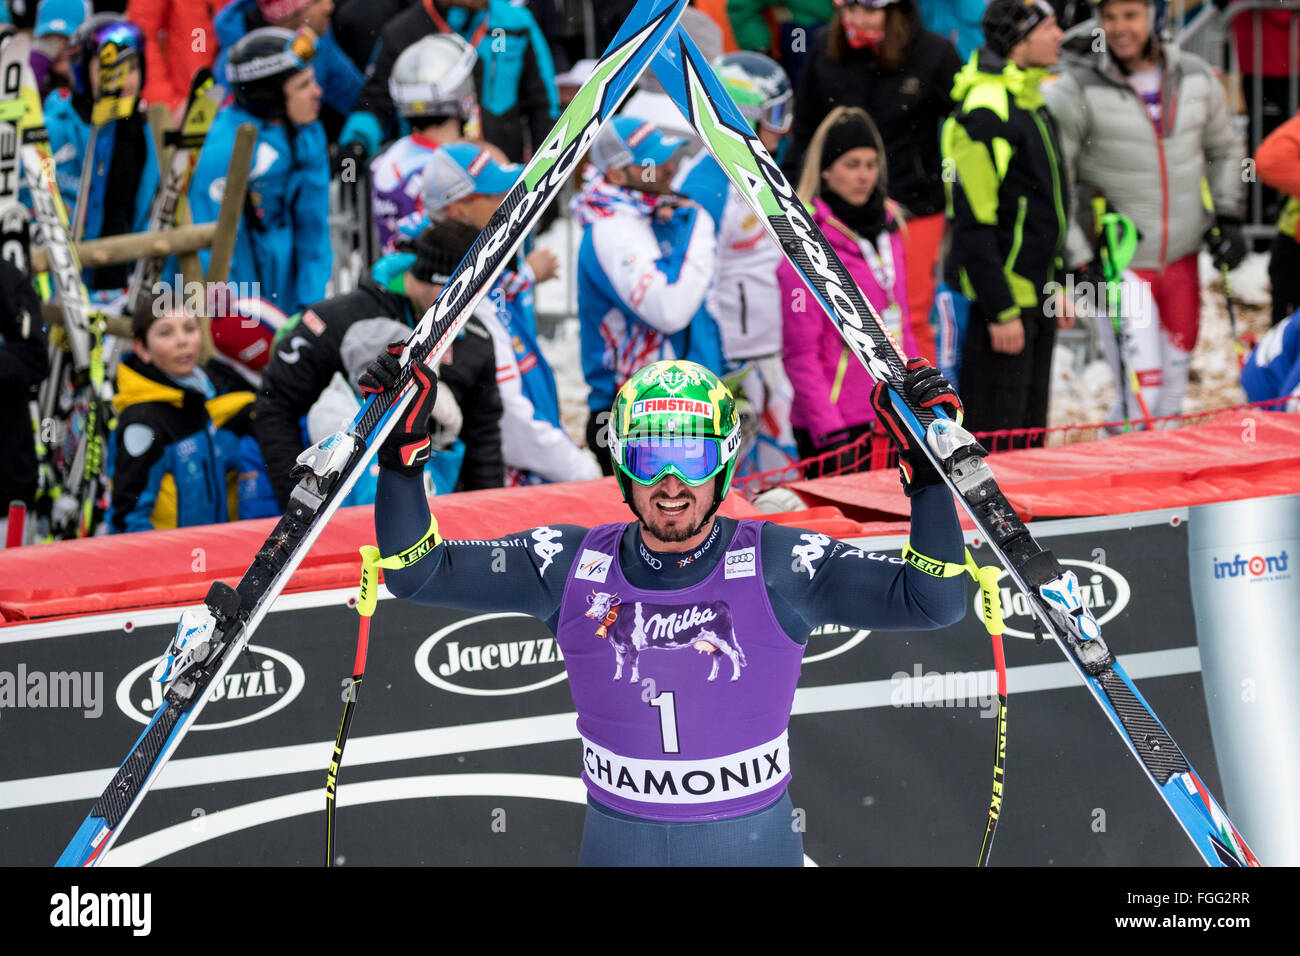 Chamonix, France. 19th February, 2016. Dominik PARIS (ITA) arrives at the finish of the Downhill part of the race to take 2nd place in the Men's Alpine Combined in Chamonix. The Men's Alpine Combined event (downhill and slalom) ended with the downhill section of the race last due to weather conditions (heavy snow) earlier in Chamonix. The race began at 15.15h on a shortened course after a further hour of delay. The podium was - 1- PINTURAULT Alexis (FRA) 2:13.29 2- PARIS Dominik (ITA) 2:13.56 3-MERMILLOD BLONDIN Thomas (FRA) 2:13. Credit:  Genyphyr Novak/Alamy Live News Stock Photo